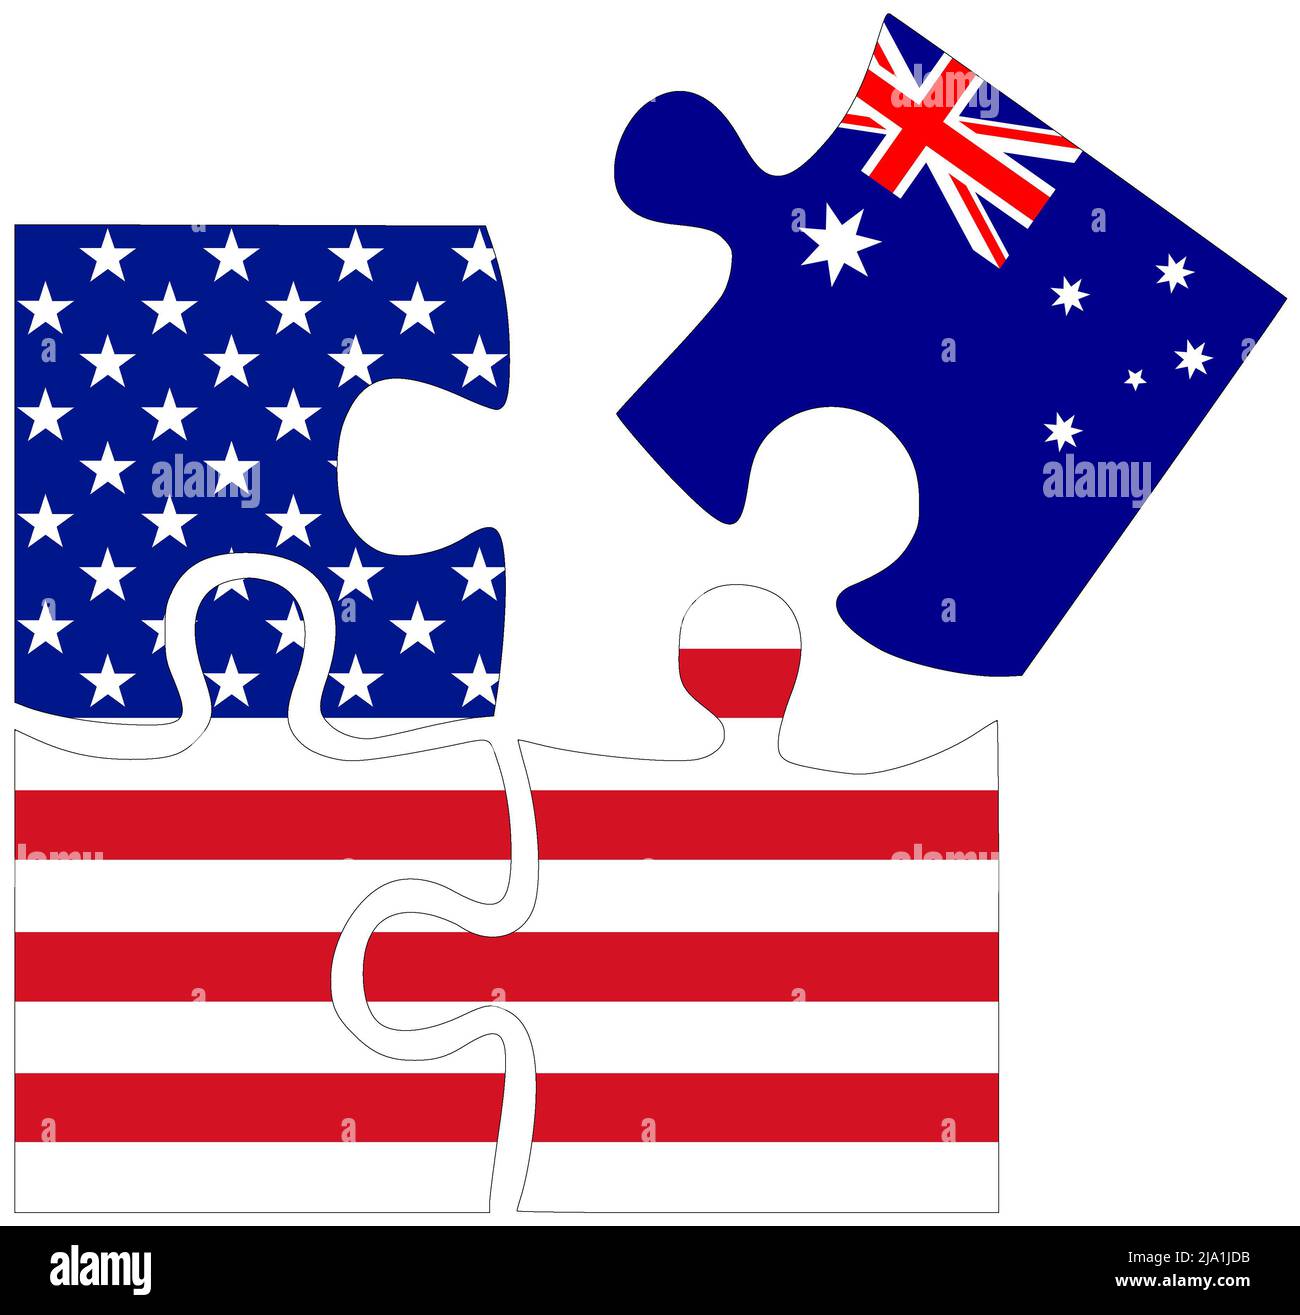 USA - Australia : puzzle shapes with flags, symbol of agreement or friendship Stock Photo